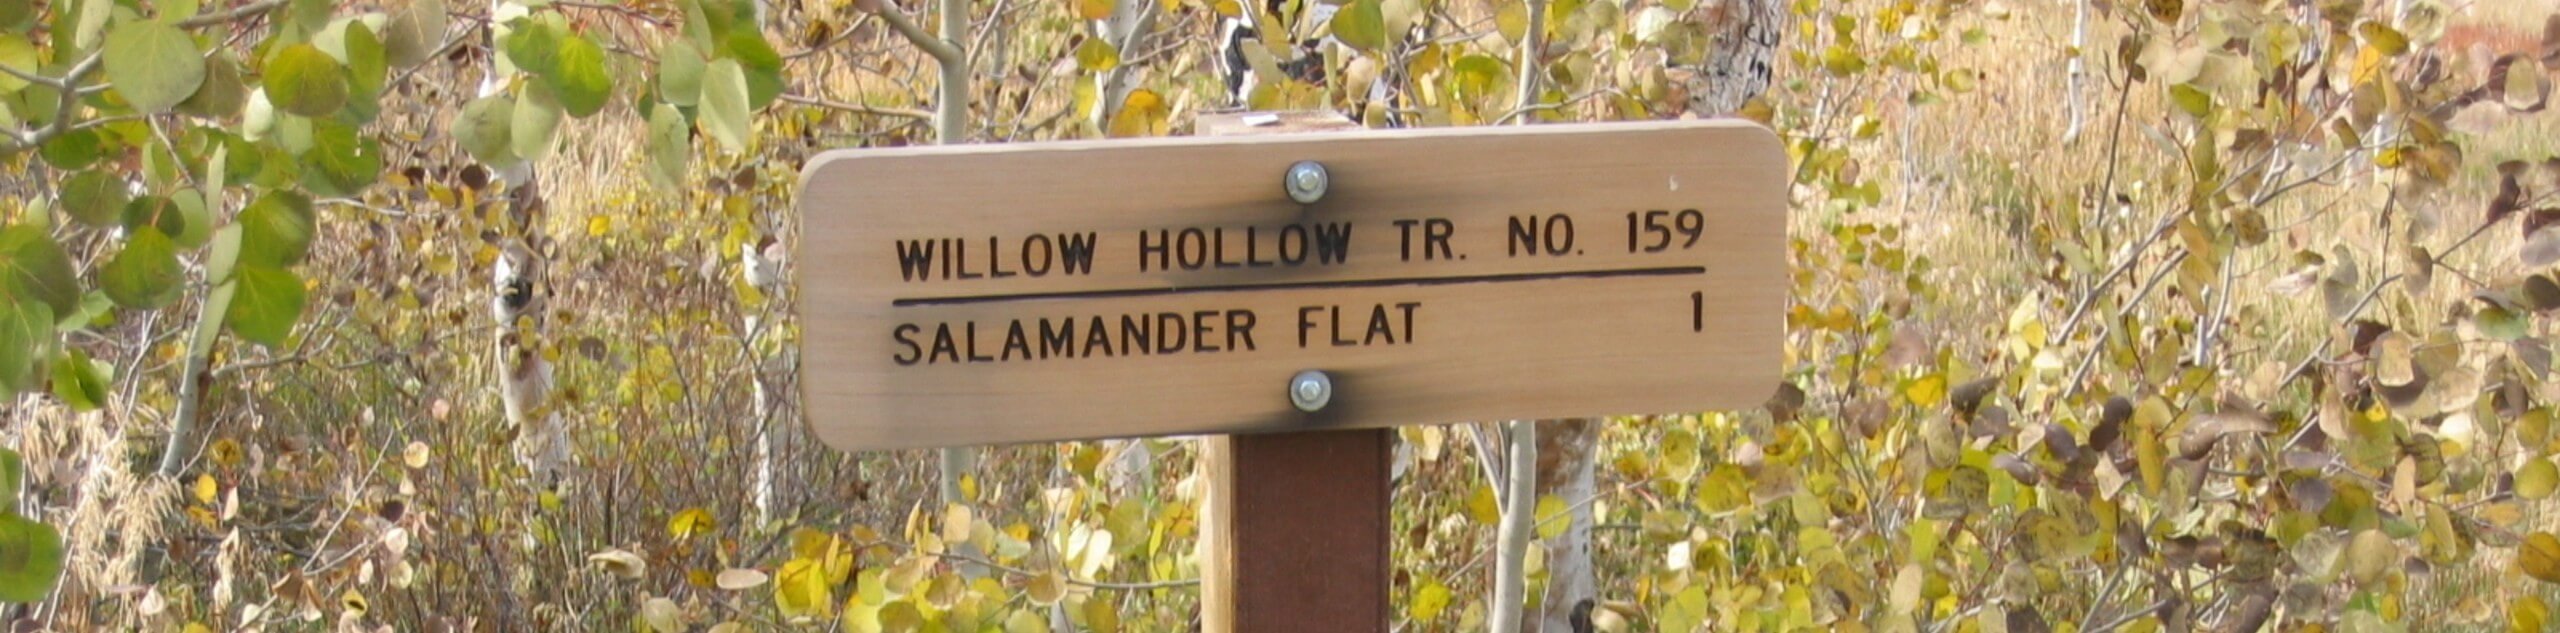 Willow Hollow, Ridge, and Pine Hollow Trail